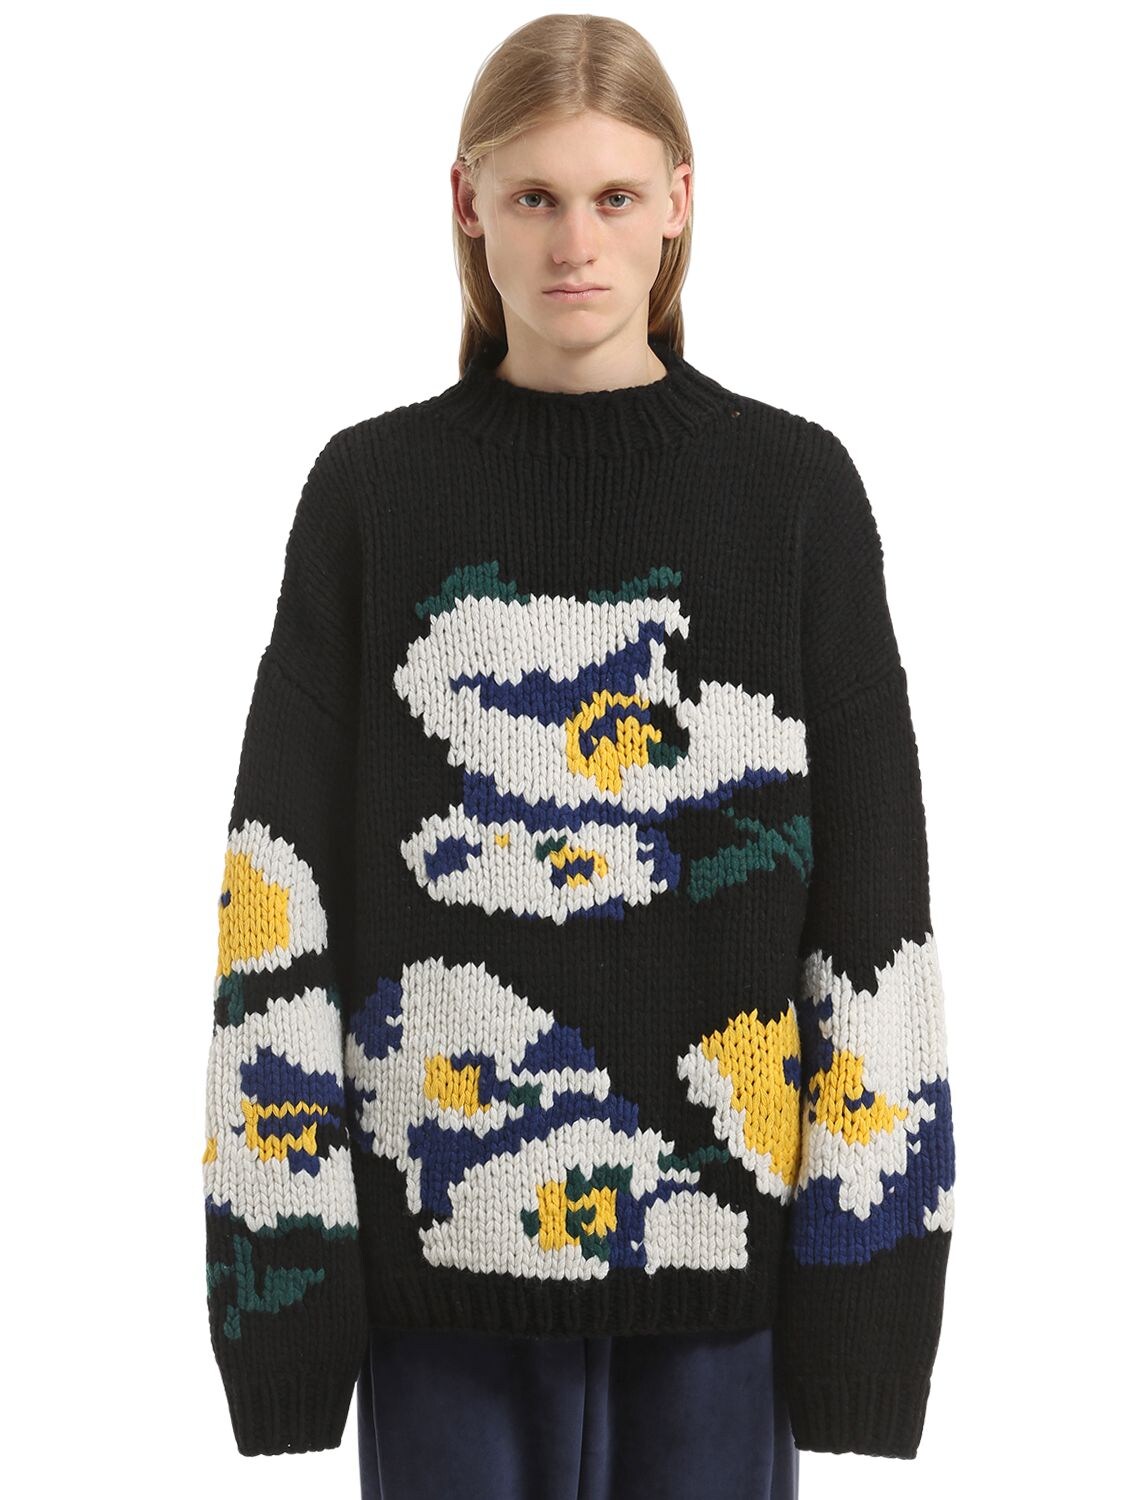 ETUDES STUDIO FLORAL CHAMBERS JACQUARD KNIT SWEATER,66IS38001-Q0hBTUJFUlM1